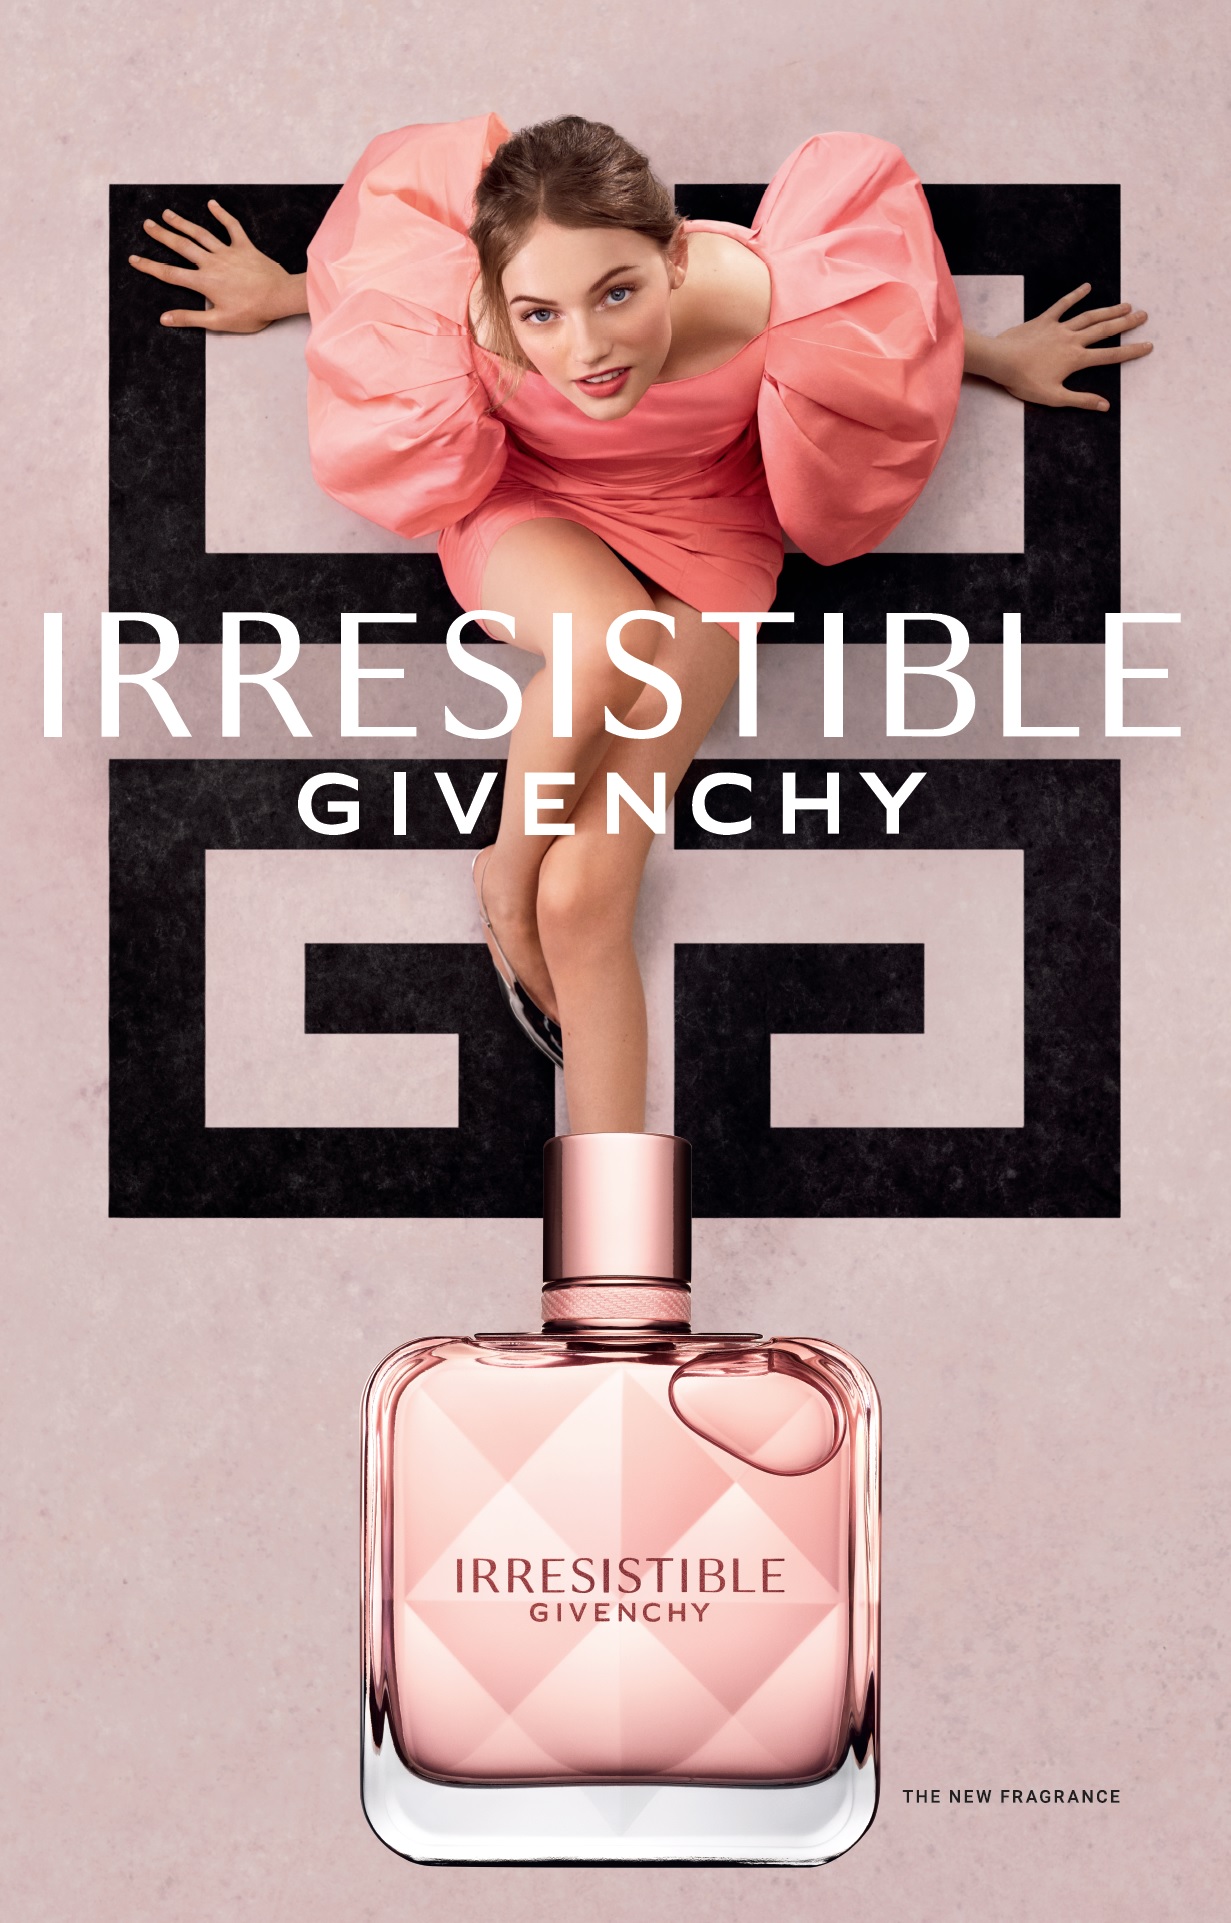 new givenchy fragrance